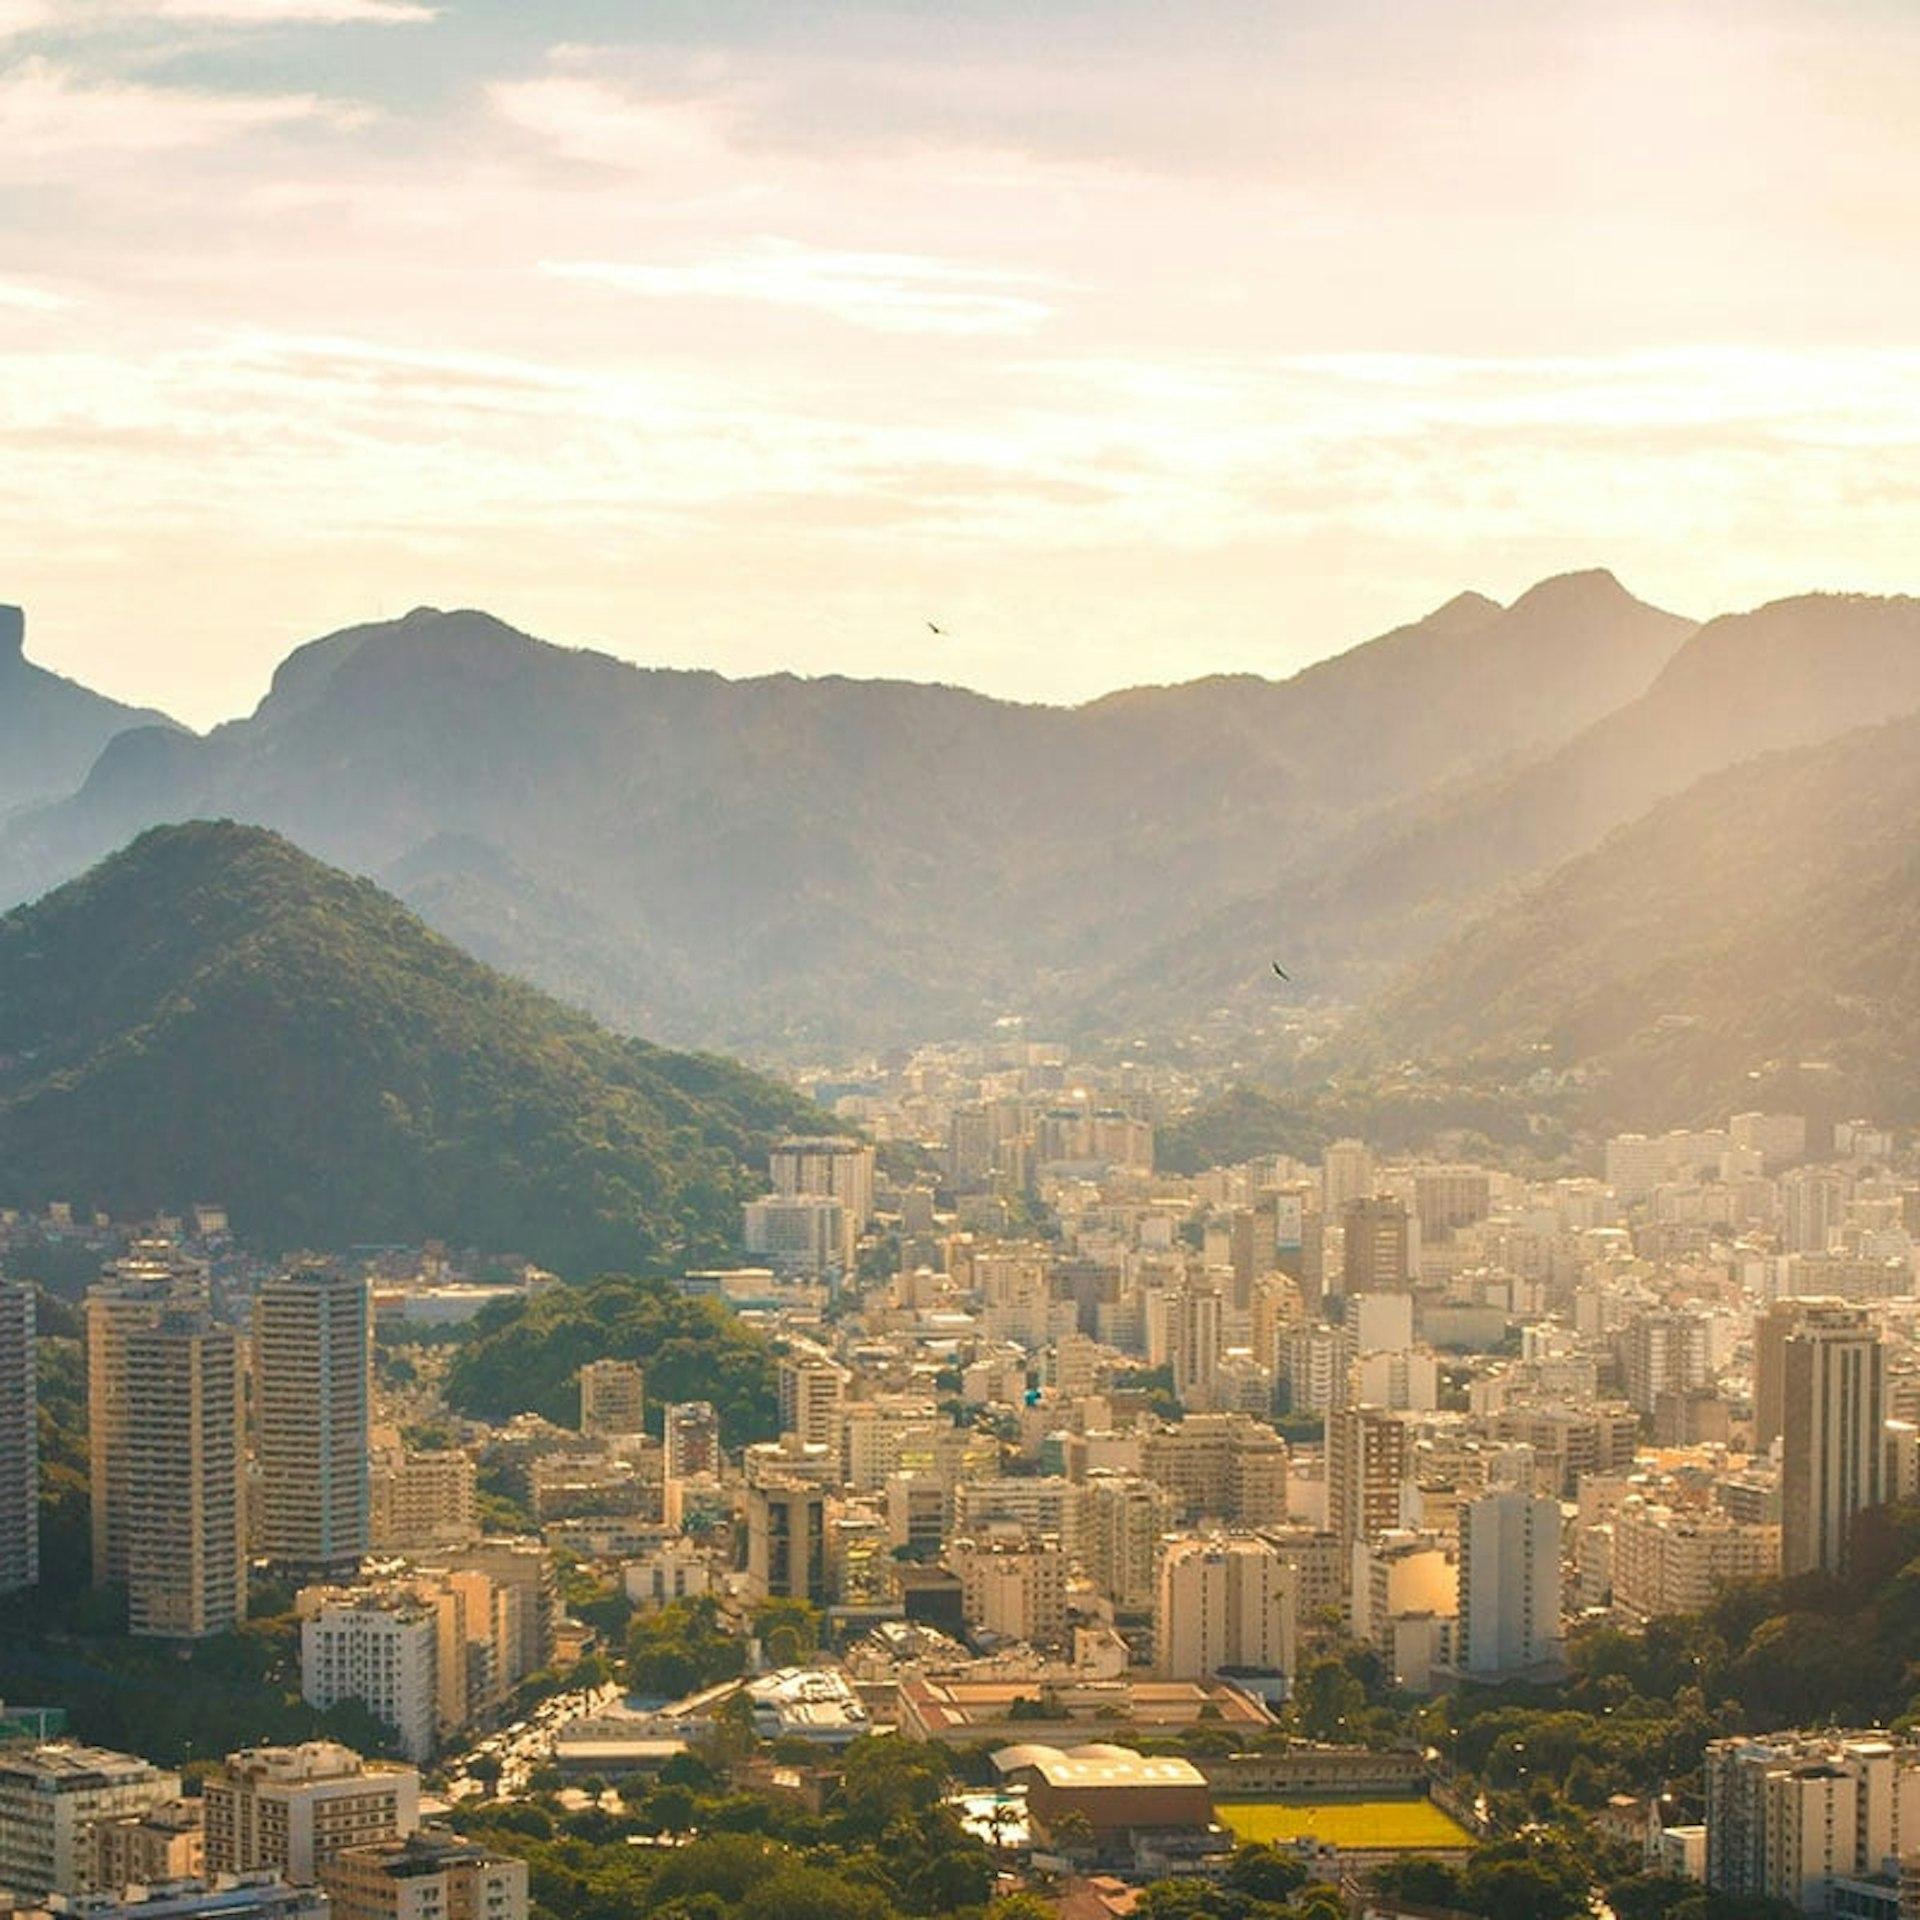 Get the latest news and updates on e-invoicing, e-ordering, e-archiving and indirect tax regulatory requirements for Brazil.